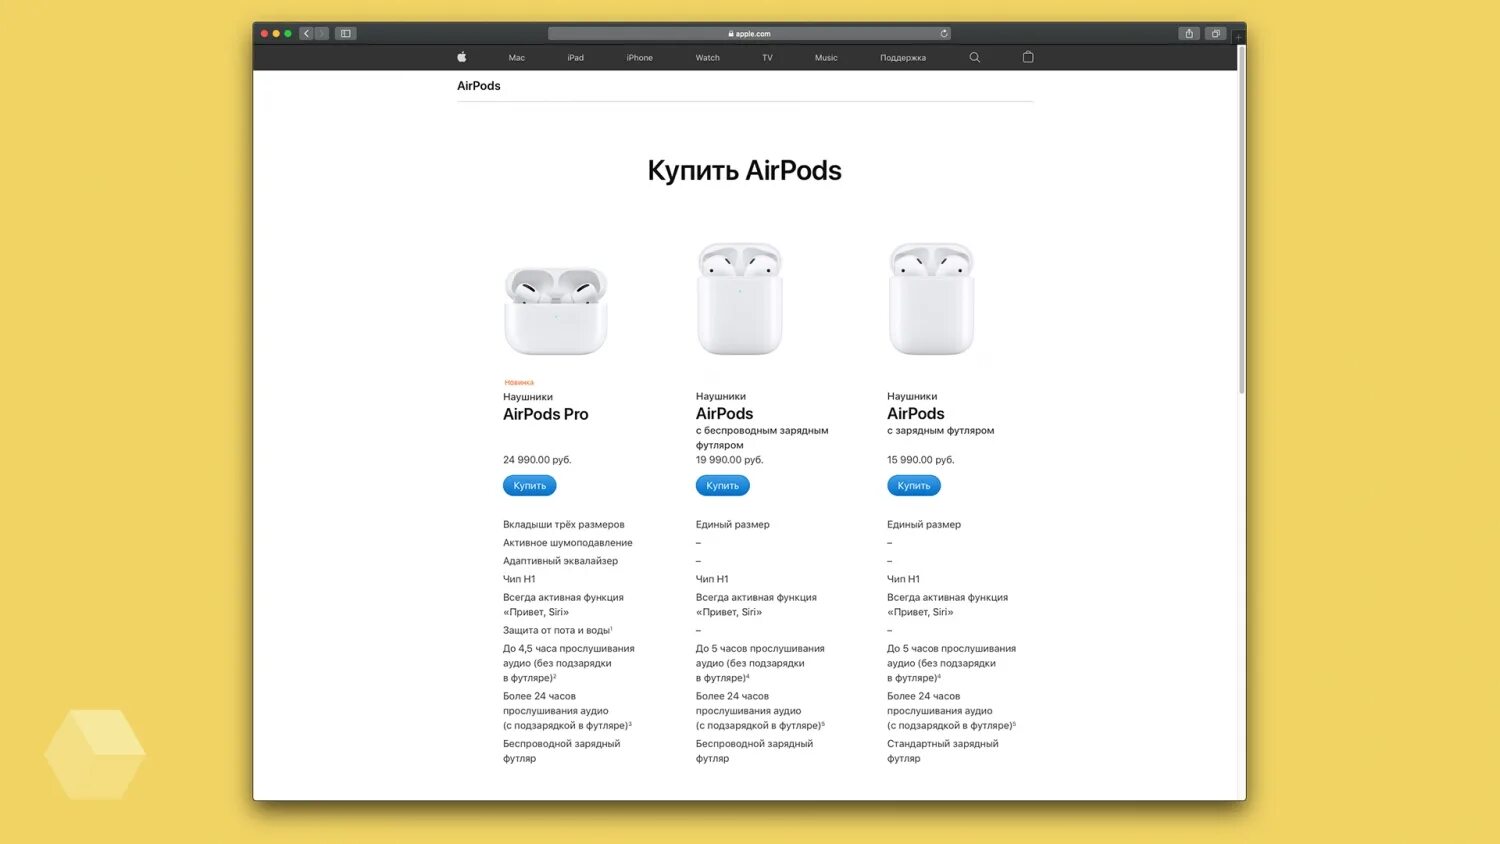 AIRPODS 2 Pro МТС. AIRPODS Pro Размеры. AIRPODS МТС. AIRPODS Pro диаметр динамика. Airpods по порядку